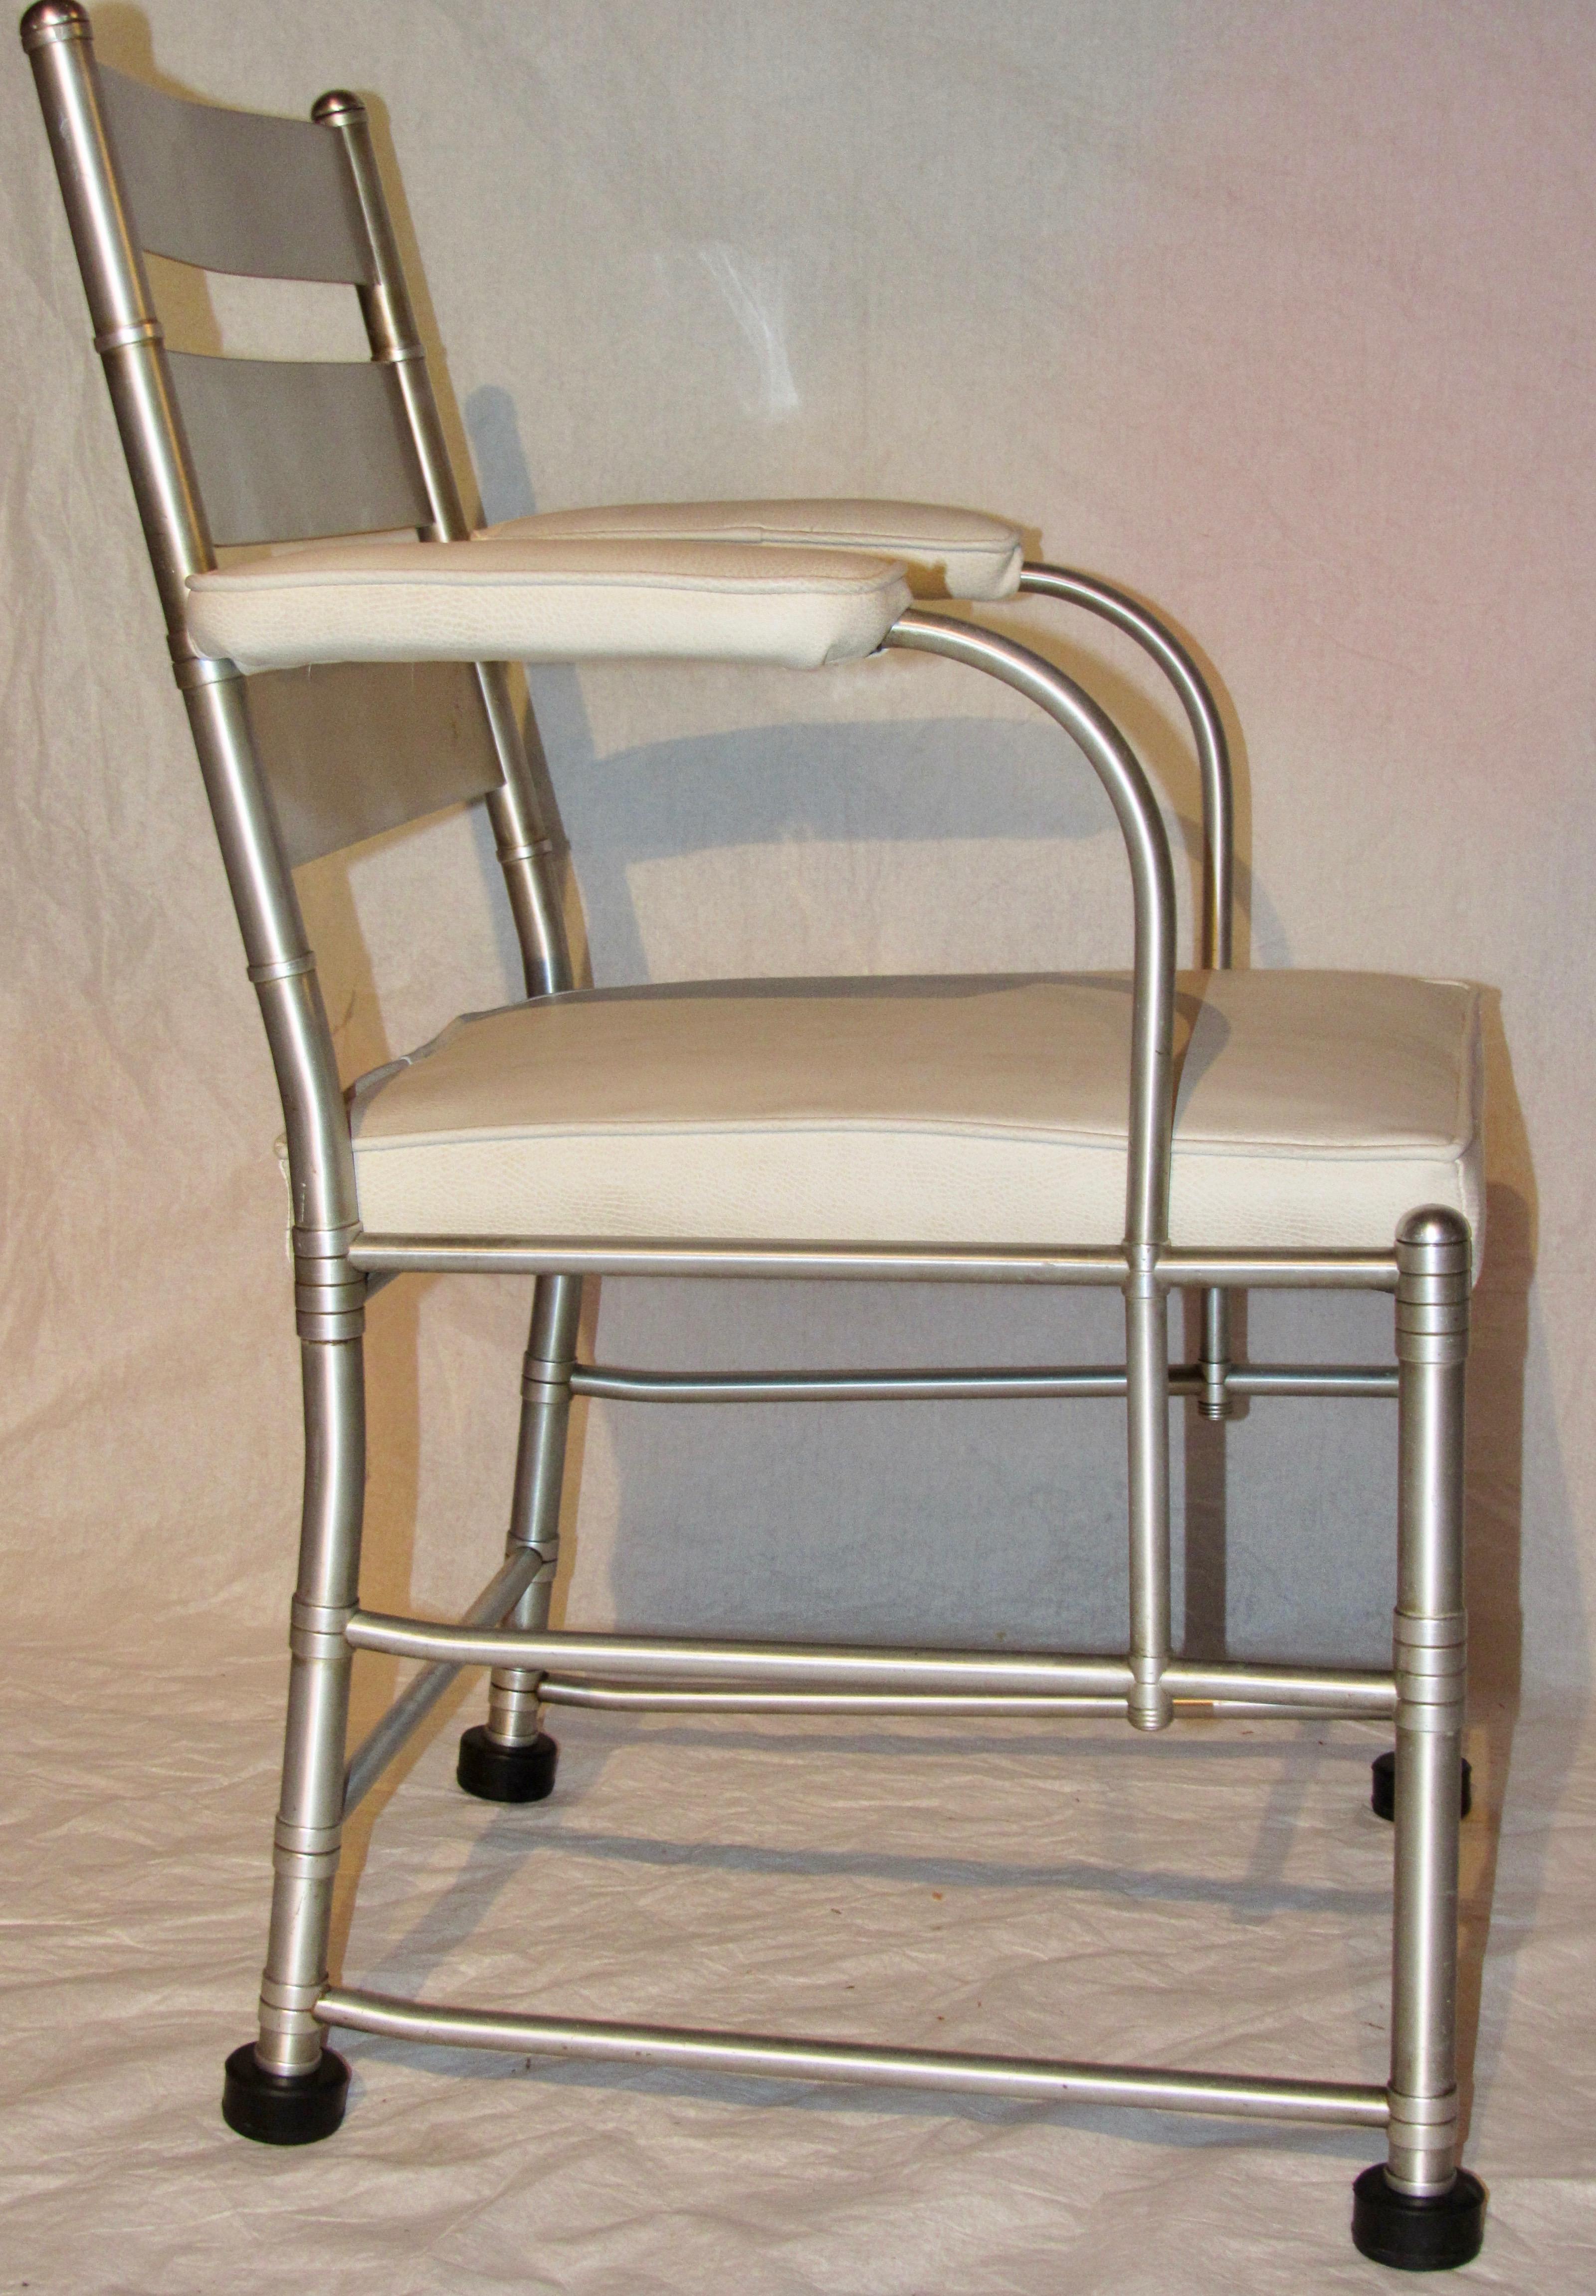 A Warren McArthur armchair from the early to mid-1930s has an anodized aluminum frame. Titled 